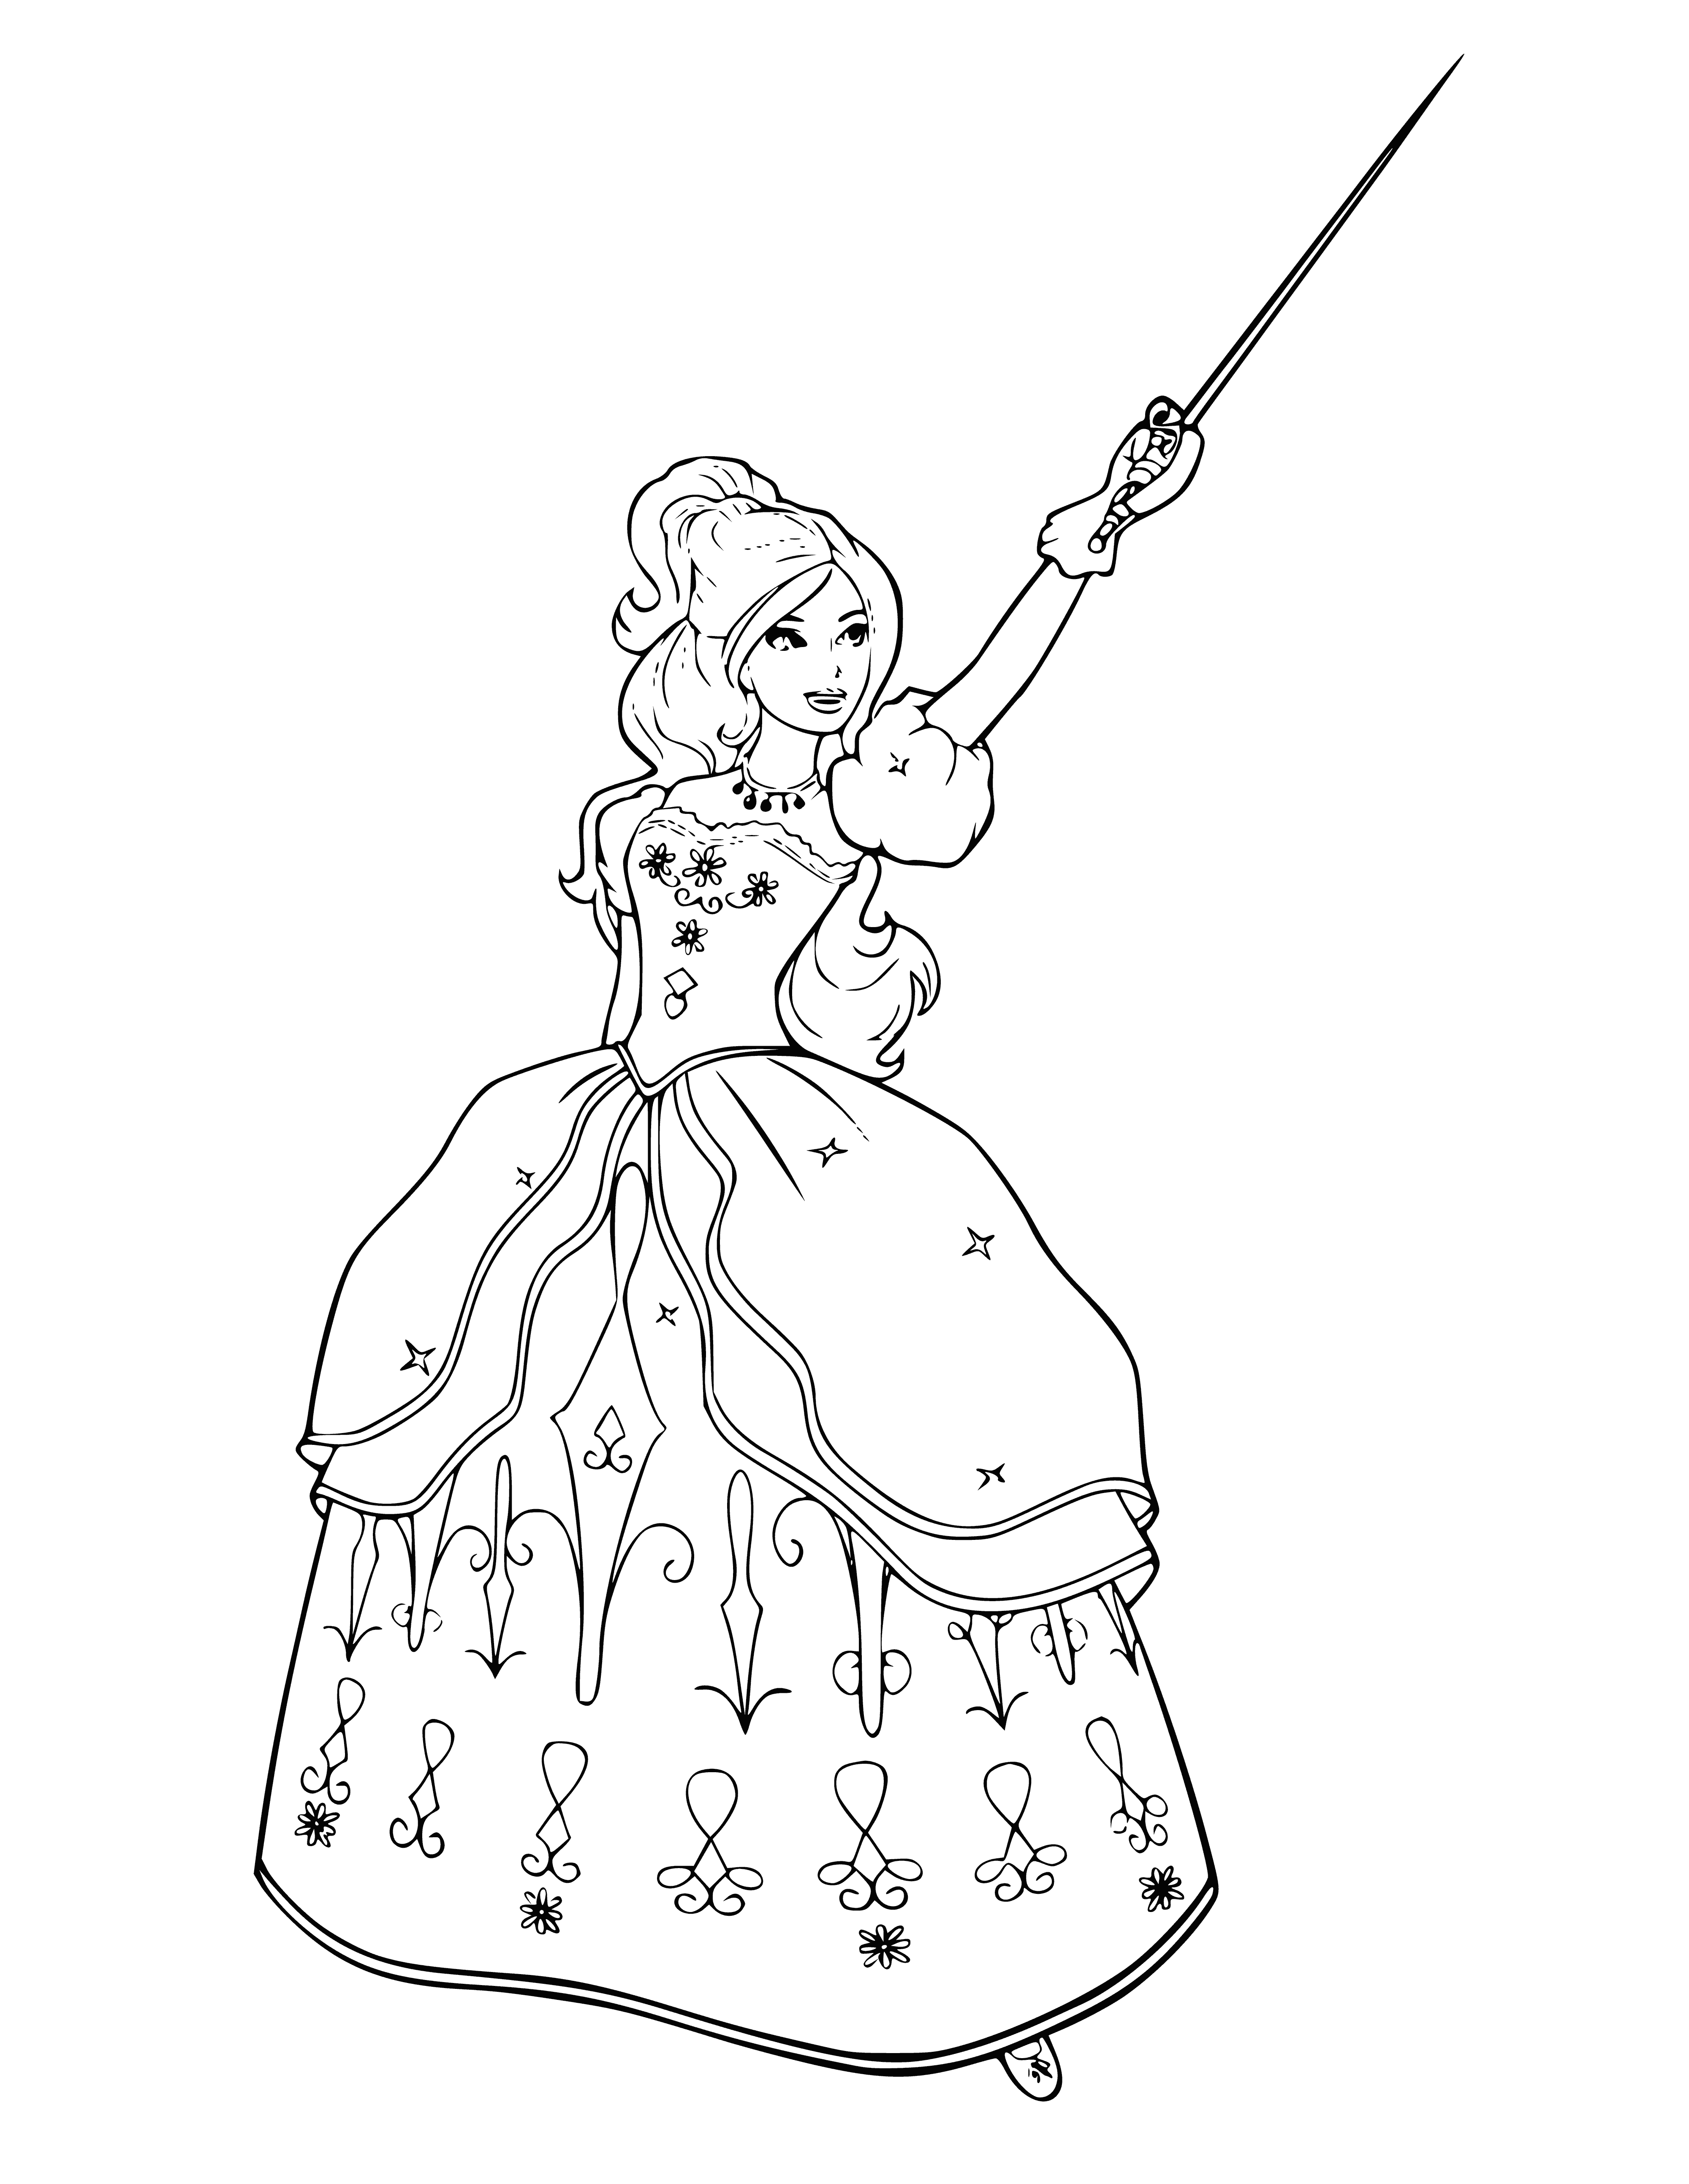 coloring page: Barbie Musketeer has a light brown ponytail and is wearing light purple shirt, dark purple cape, gold belt, purple skirt & brown boots, and holds a golden sword.